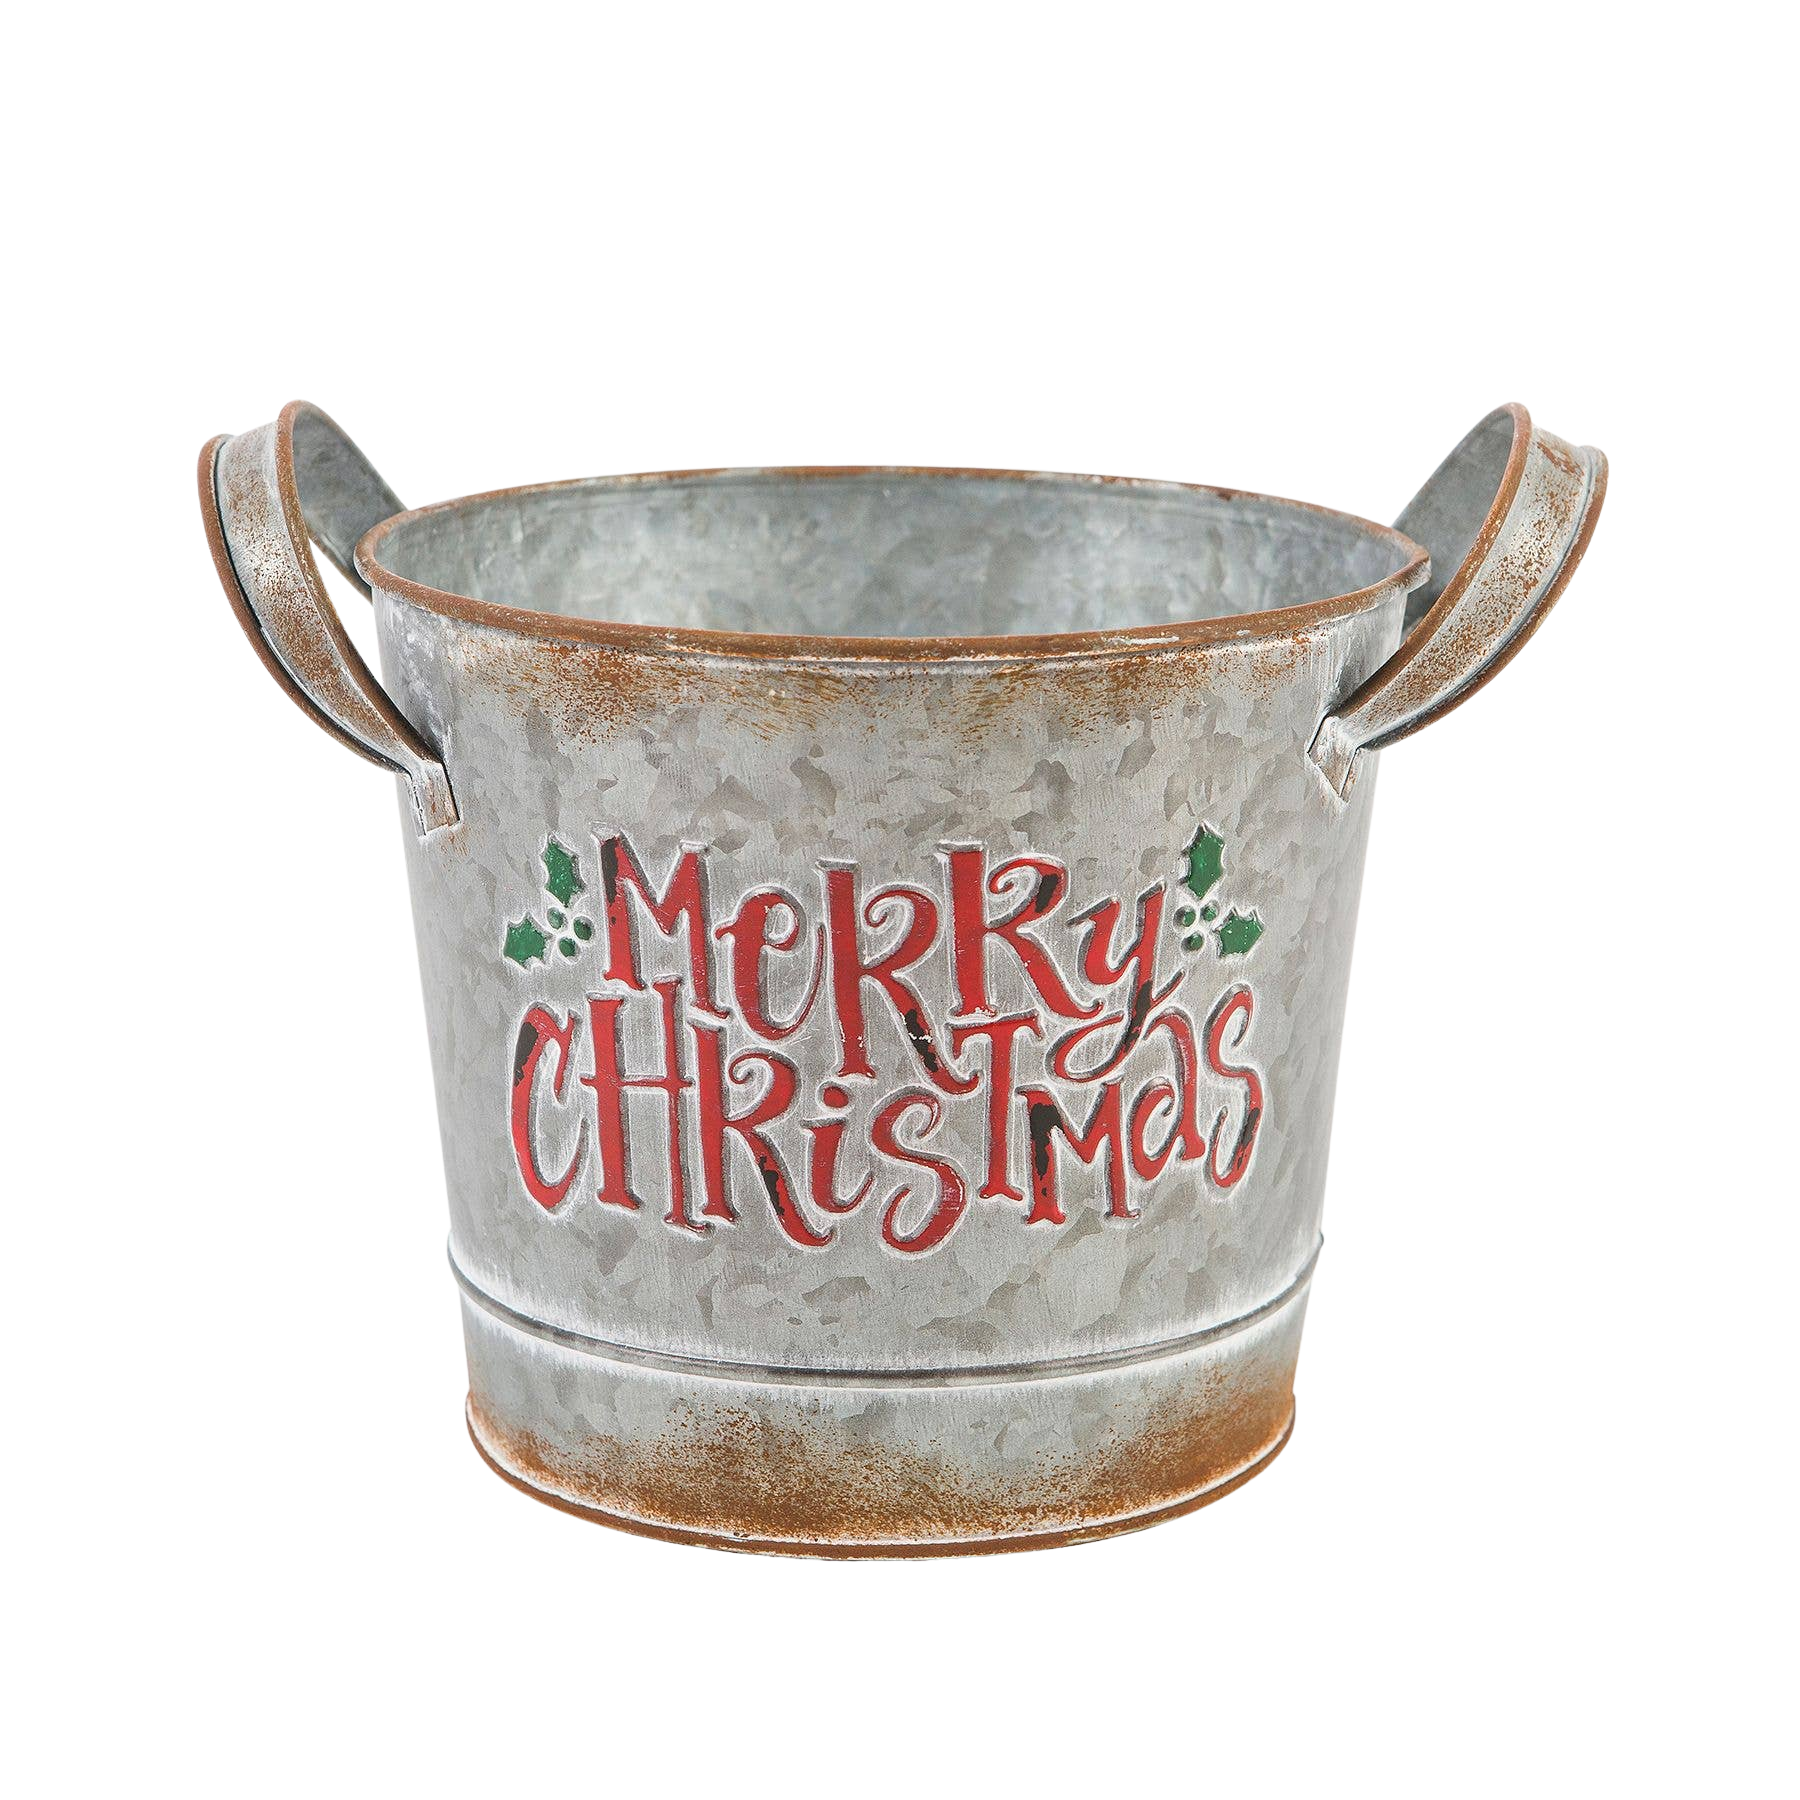 Rustic "Merry Christmas" Container